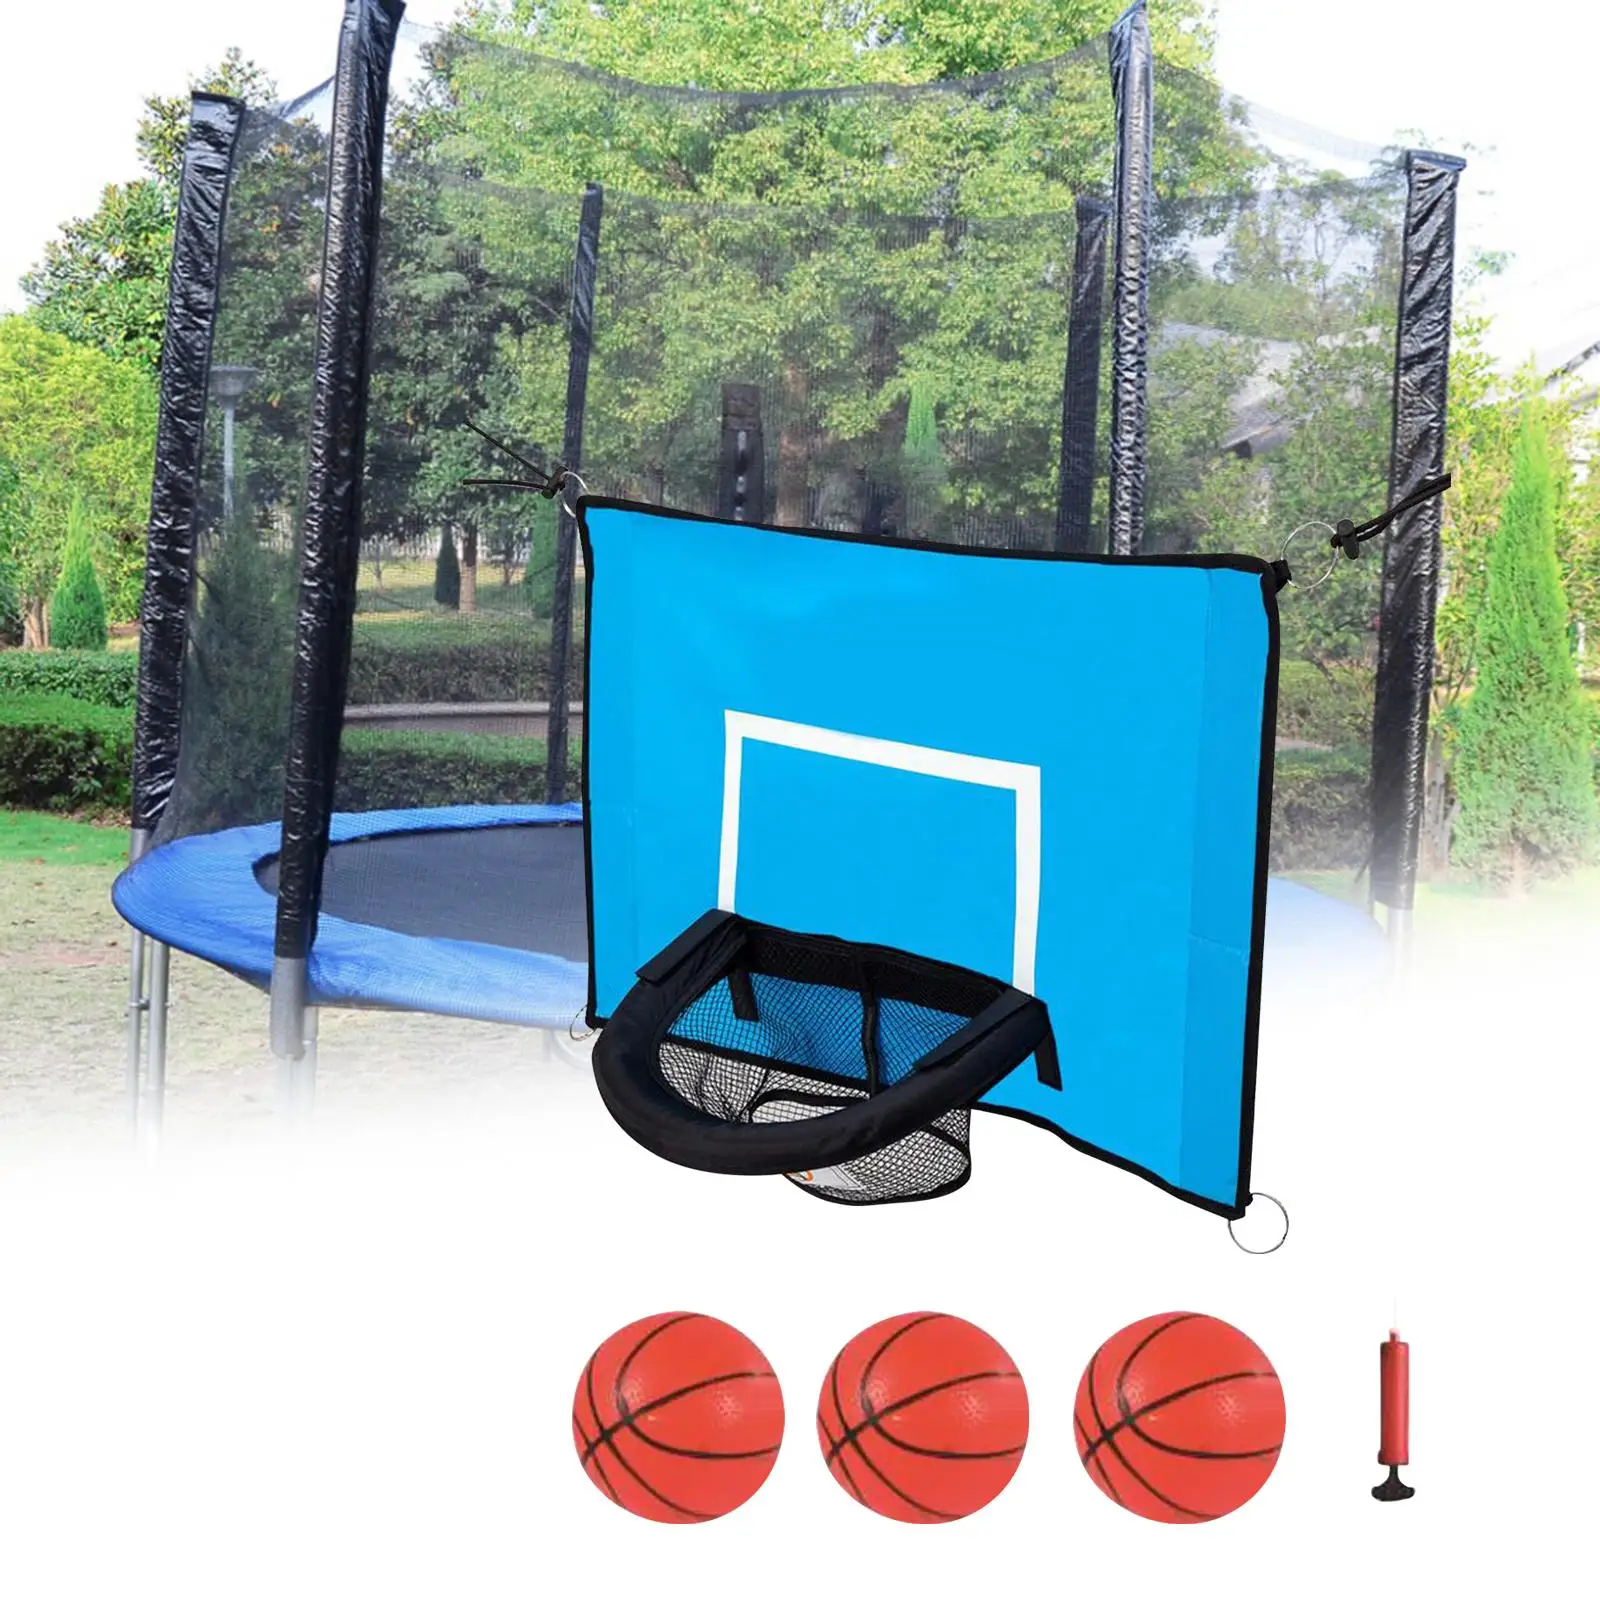 Basketball Hoop for Trampoline Basketball Frame Replacement Boys Girls Toy Easy to Assembled Garden for Dunking Universal